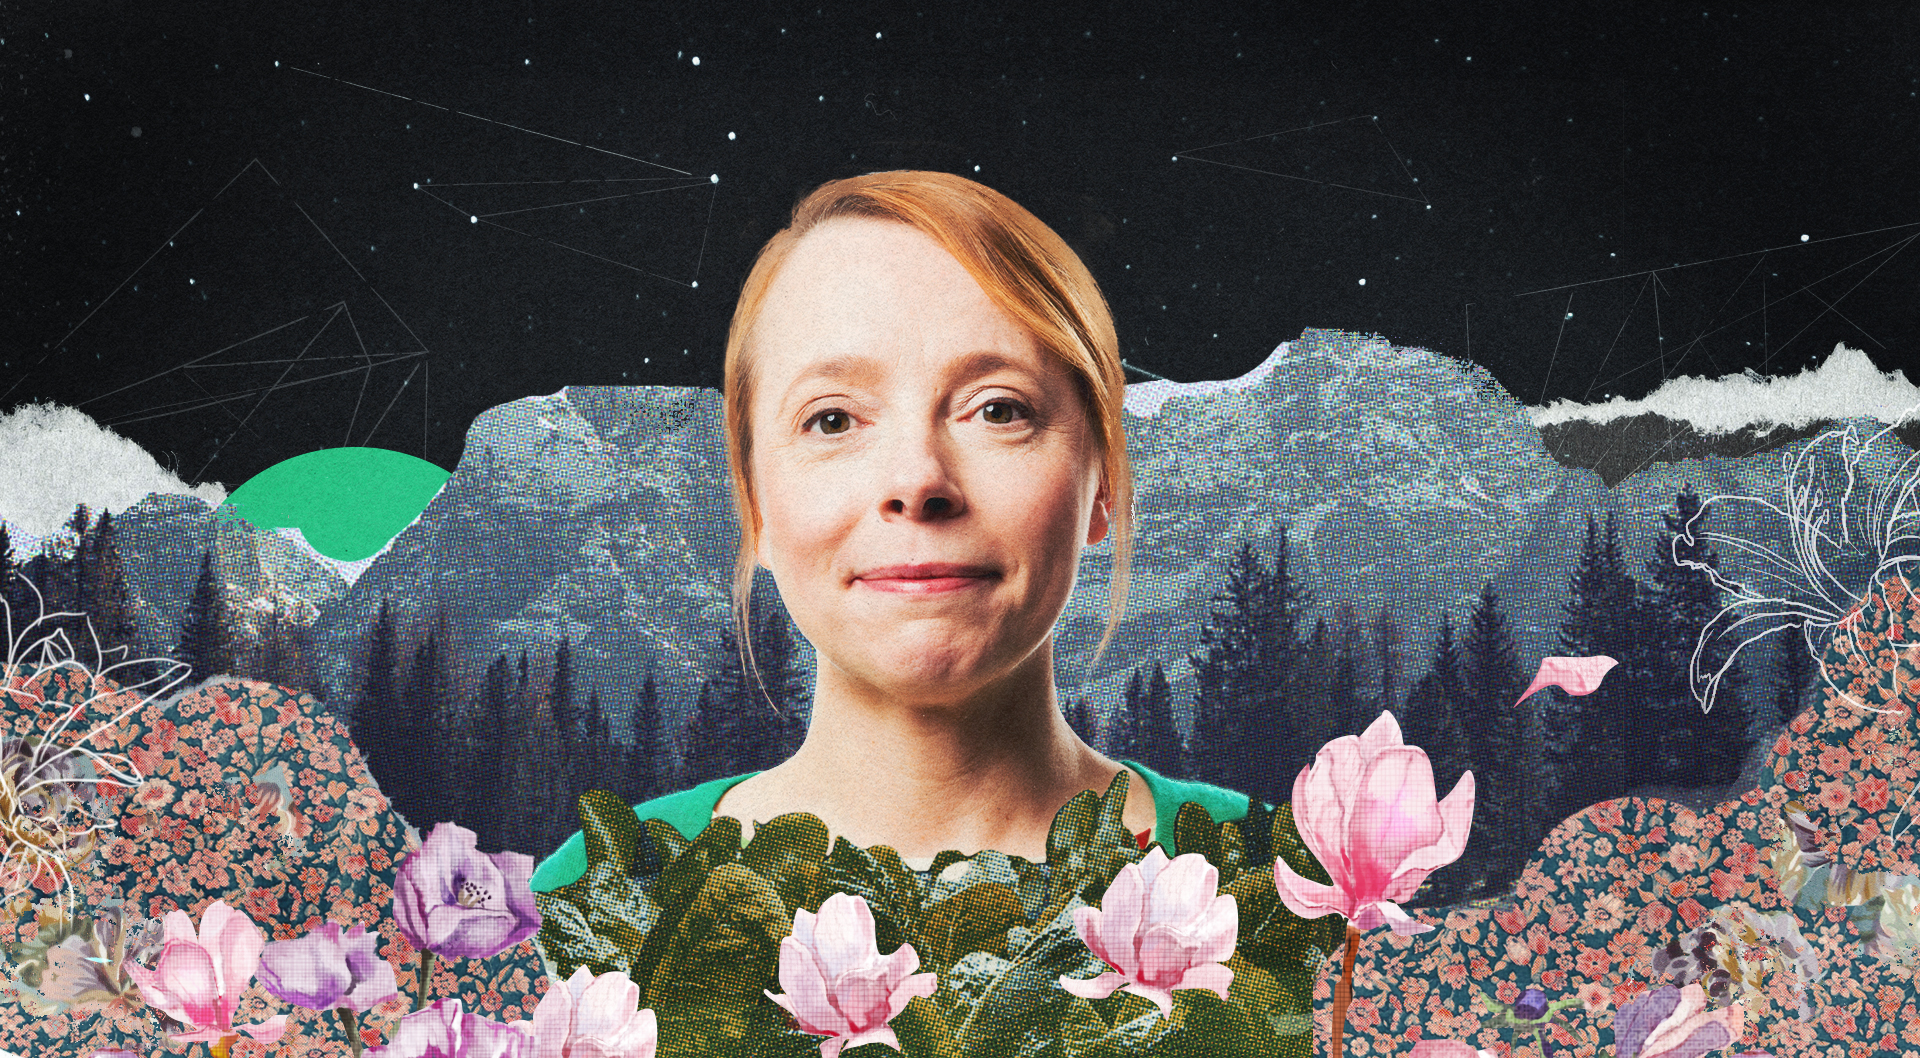 Researcher and fusionist Asta Roseway is pictured in an illustrated landscape featuring stylized flowers, a mountain range and a starry night sky